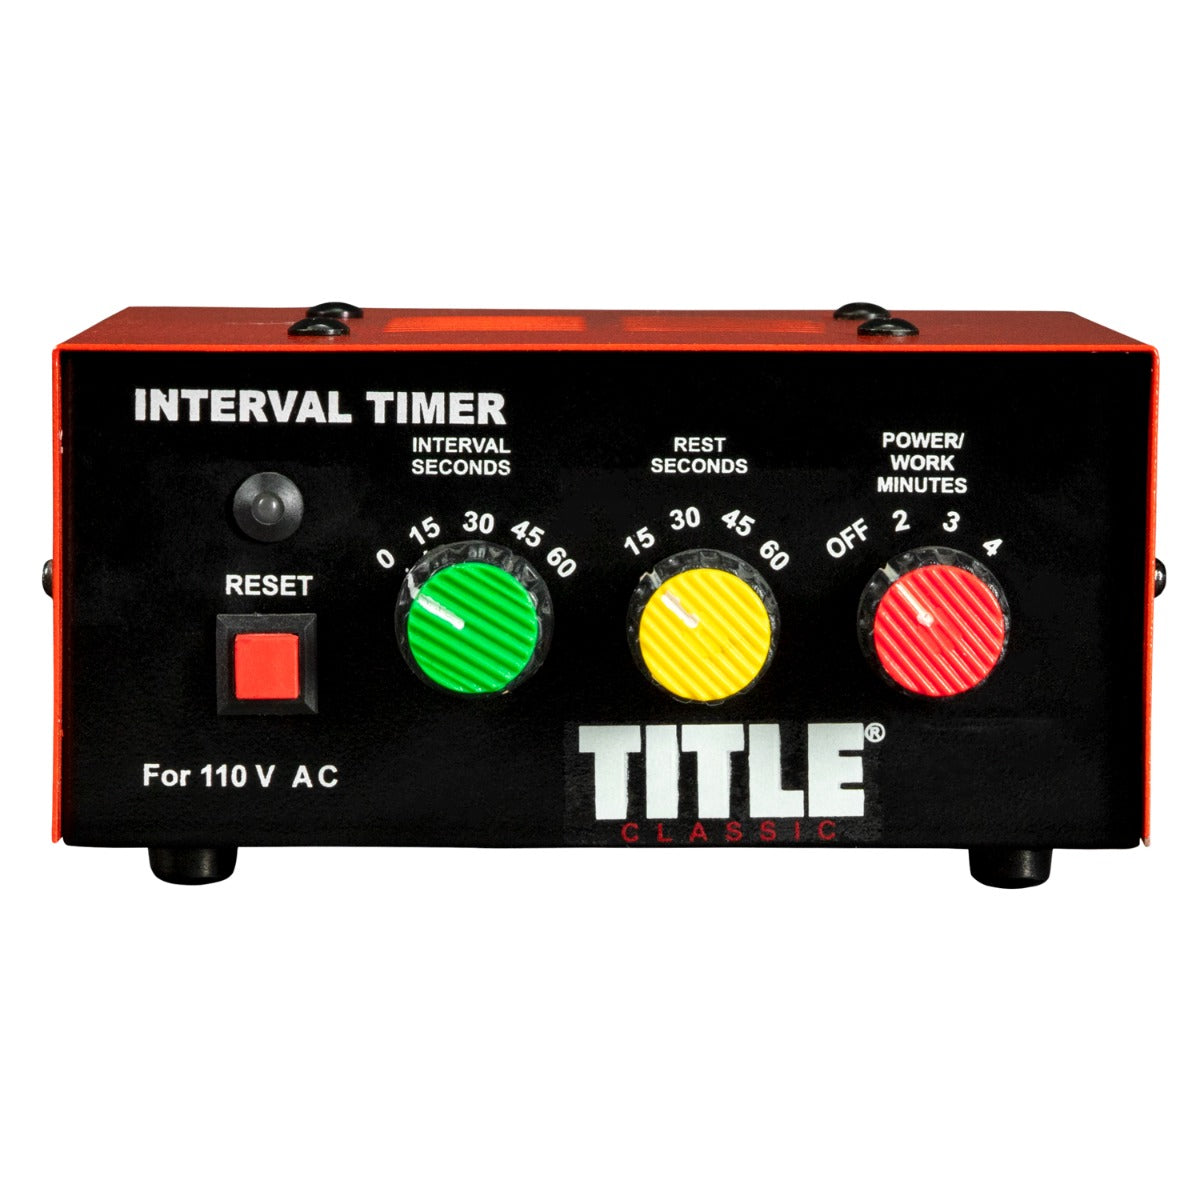 TITLE Classic Personal Interval Timer